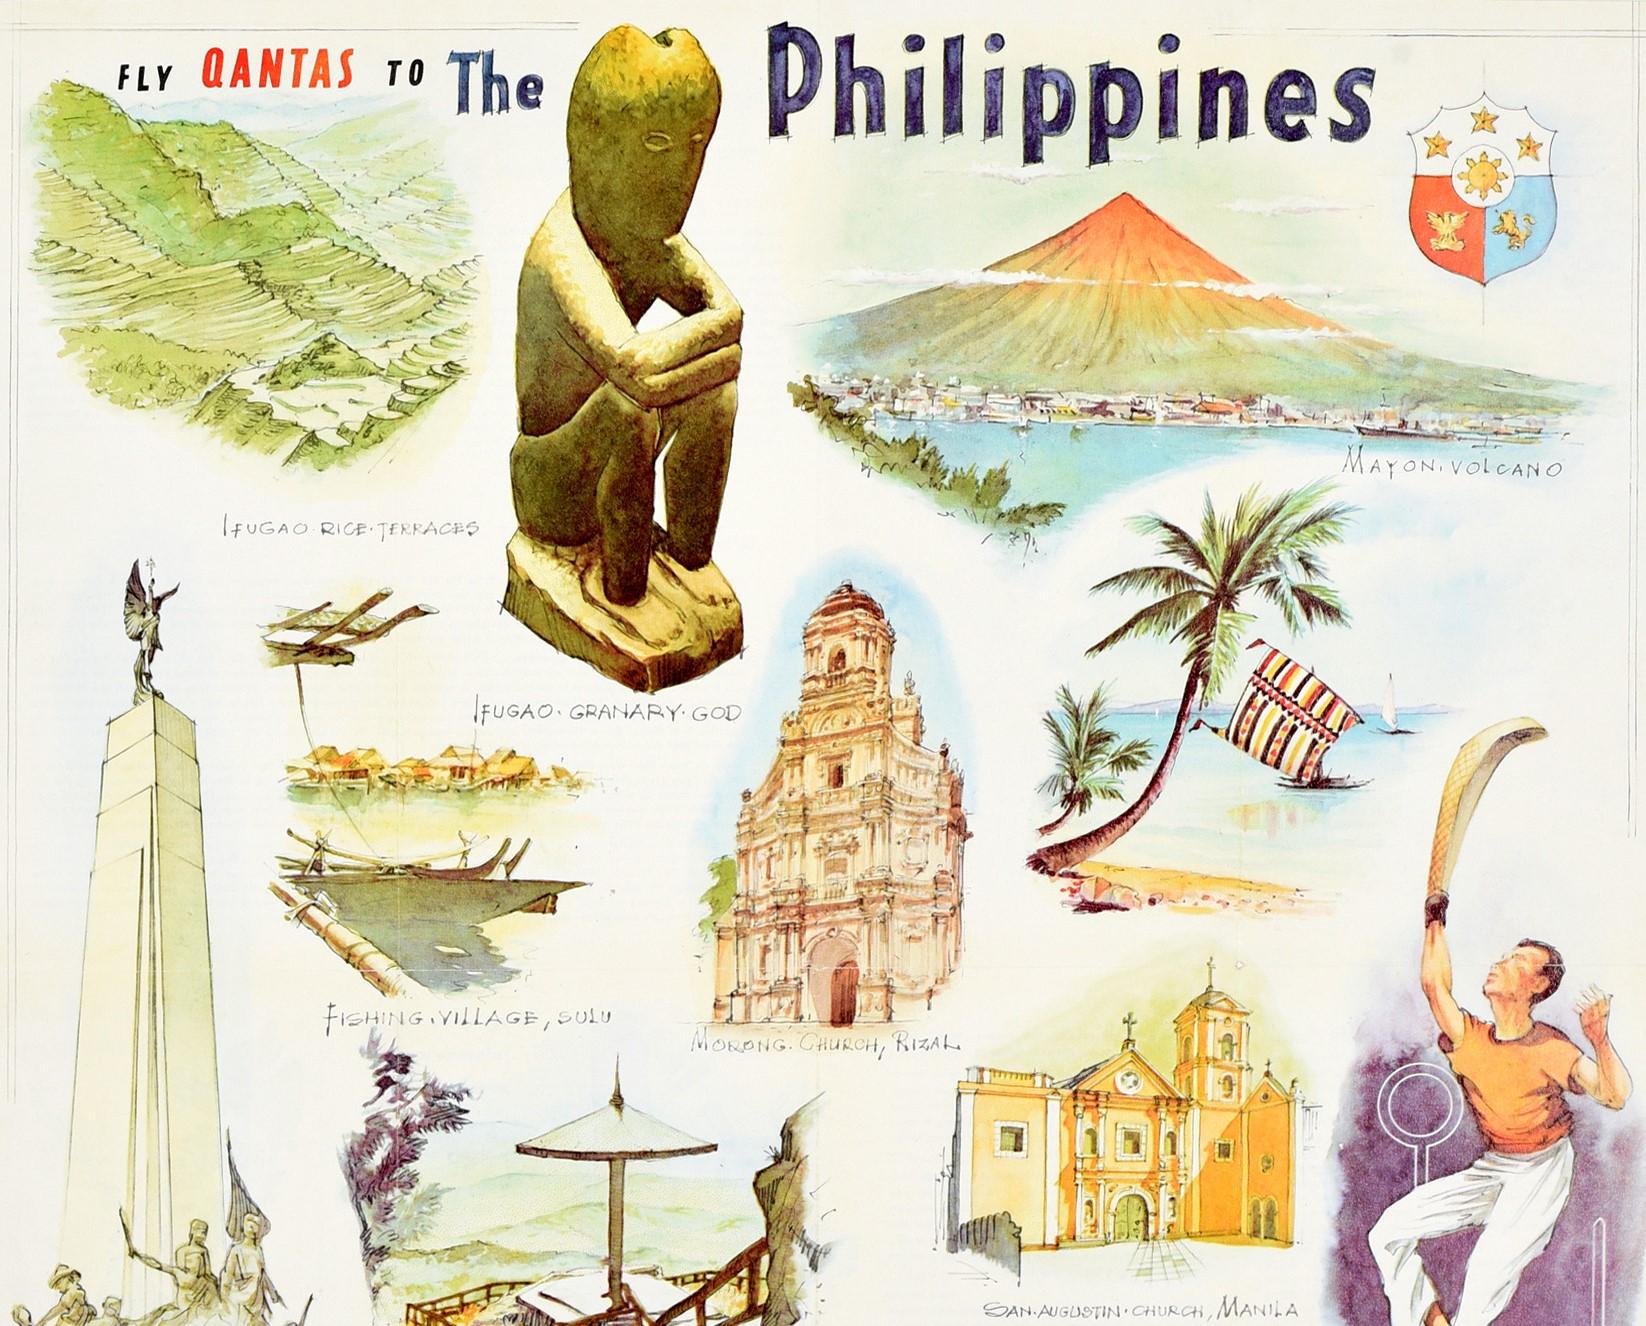 Original vintage travel poster - fly Qantas to the Philippines - featuring colorful scenic illustrations including the Mayon volcano, rice terraces, a sports man playing jai-alai, the Philippine Congress and University buildings, a view of the